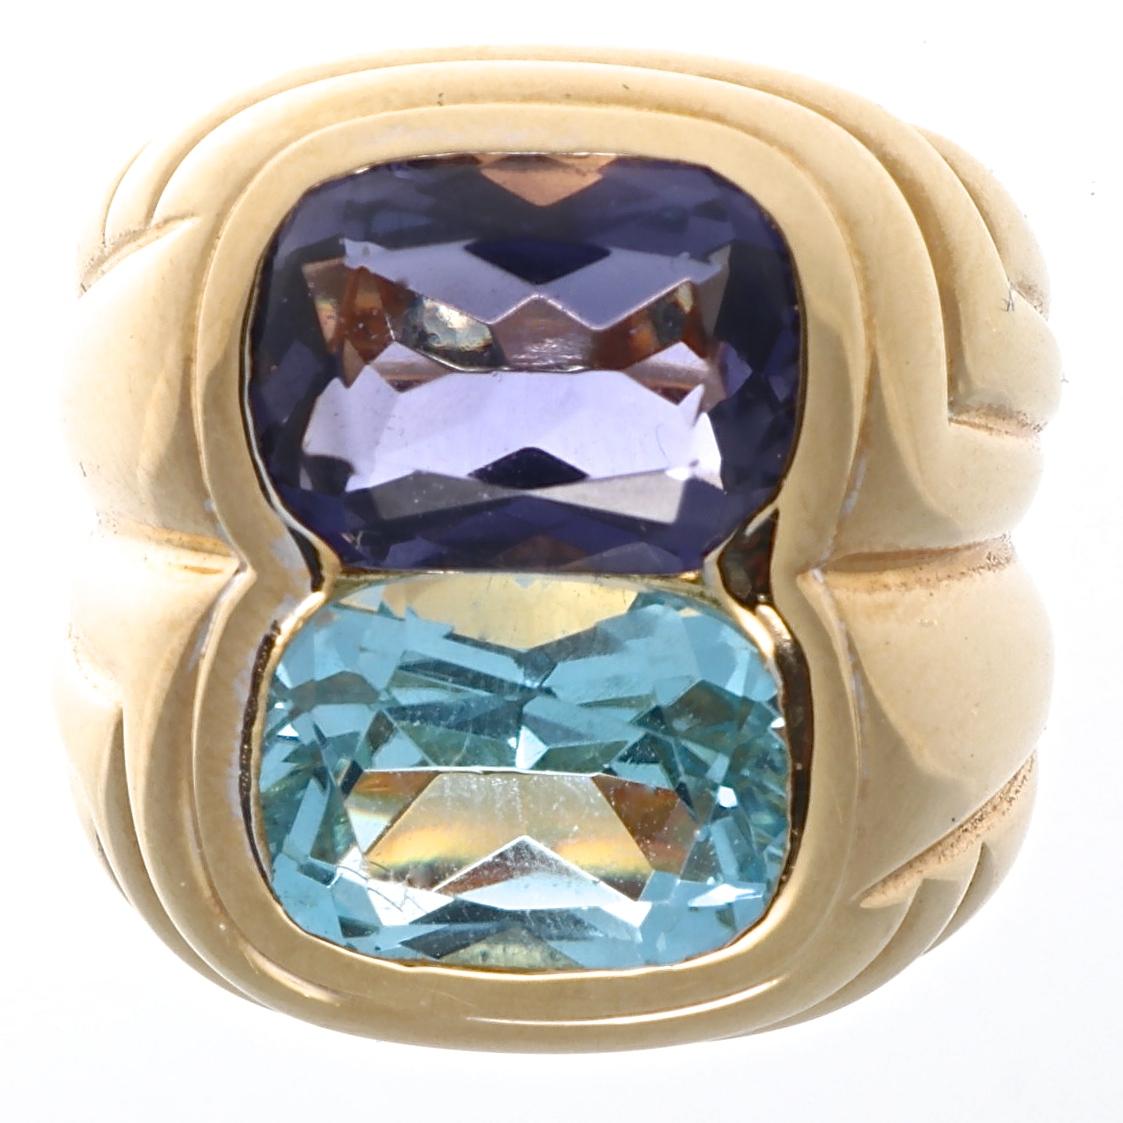 Quintessentially bold and colorful. Two characteristics integral to Bulgari's designs. Featuring vibrant blue topaz and glowing purple iolite rolled into contours of 18k yellow gold. Signed Bvlgari. Ring size 5 and can easily be resized to fit, if